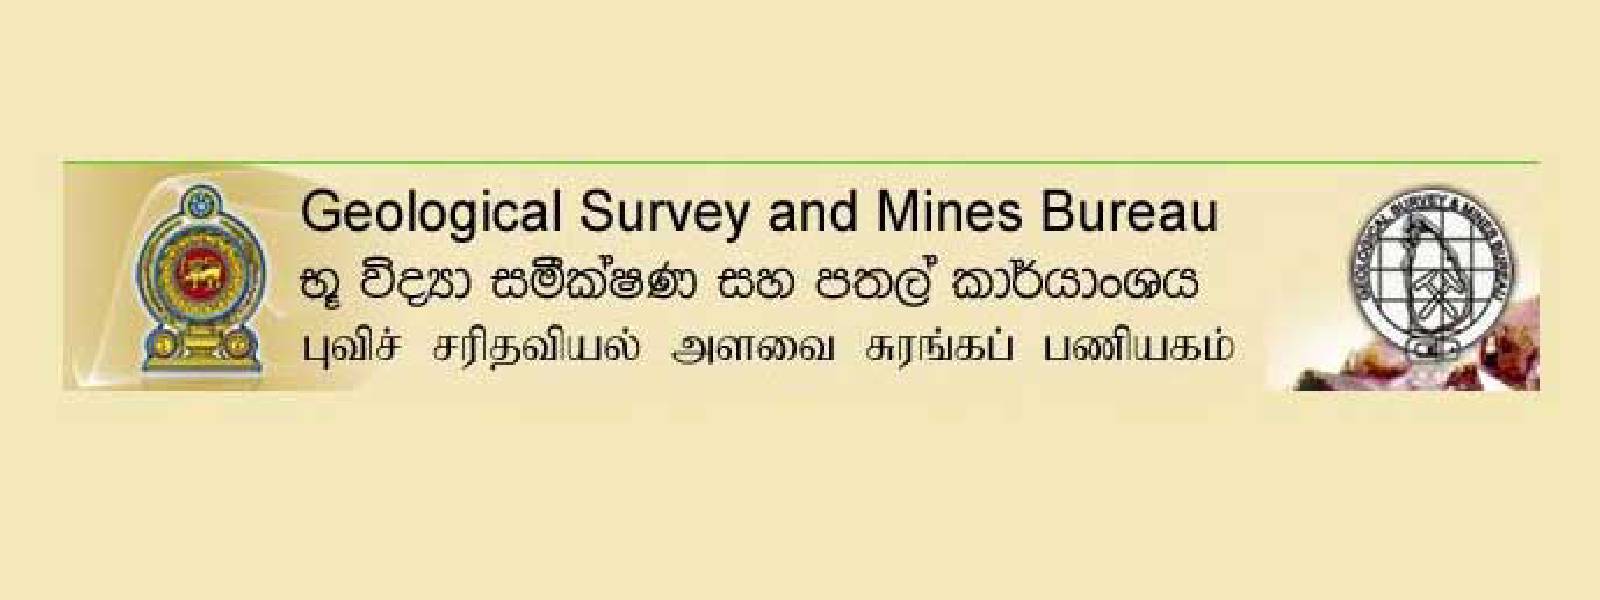 Validity period of mining license for minerals extended